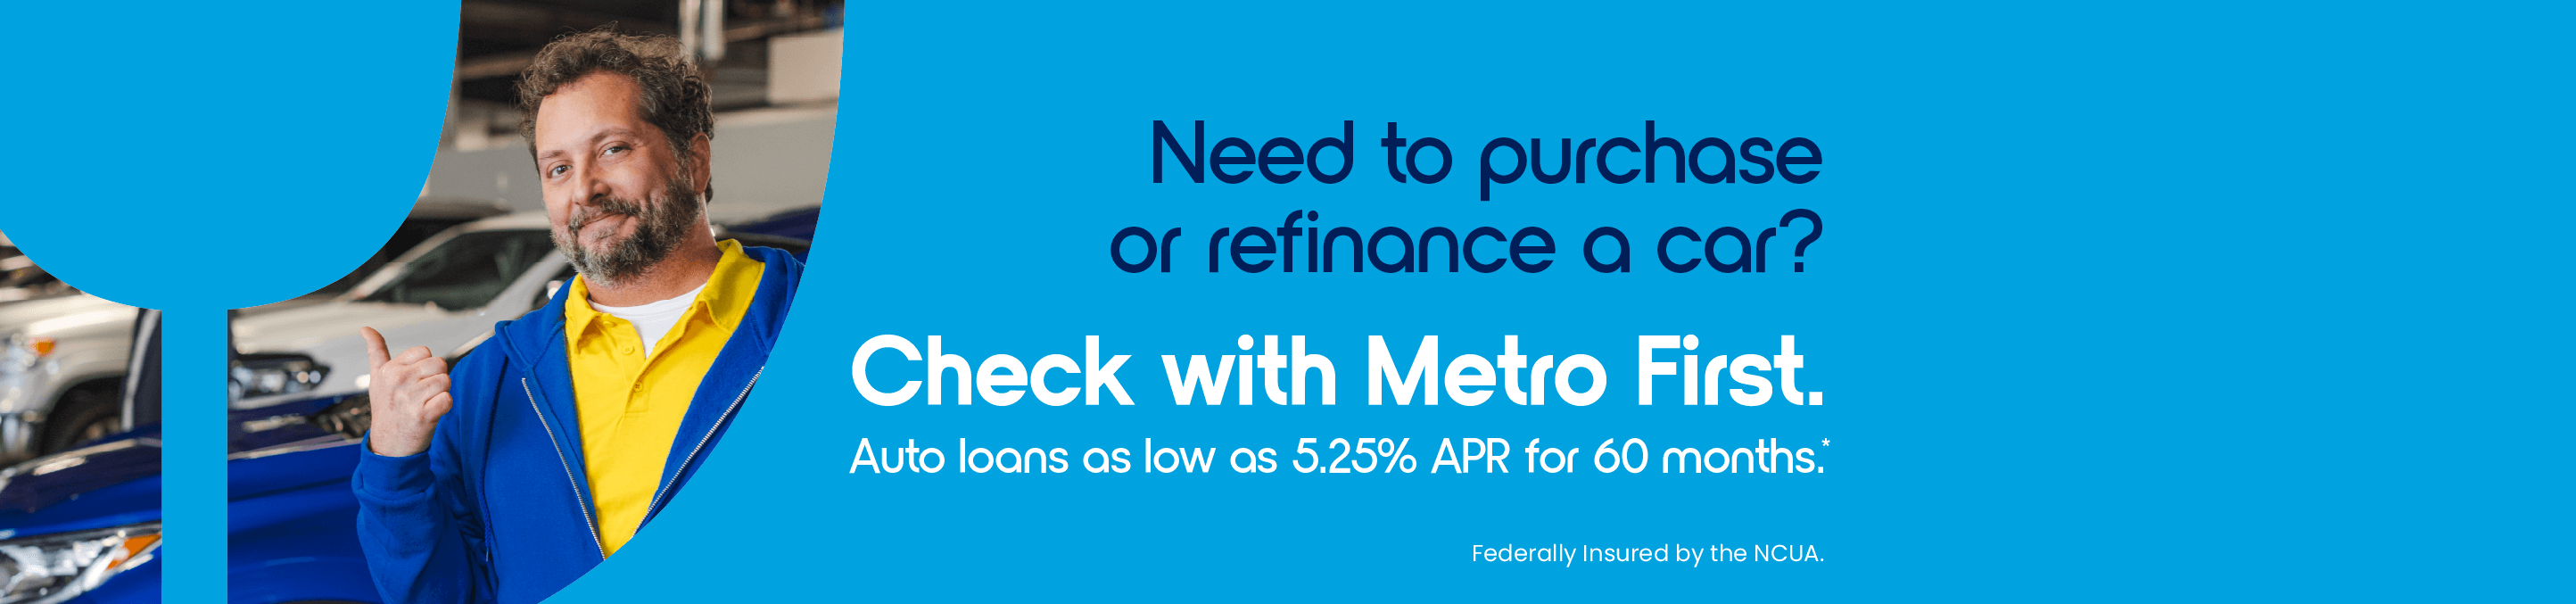 Need to purchase or refinance a car? Check with Metro First. Auto loans as low as 5.25% APR for 60 months*